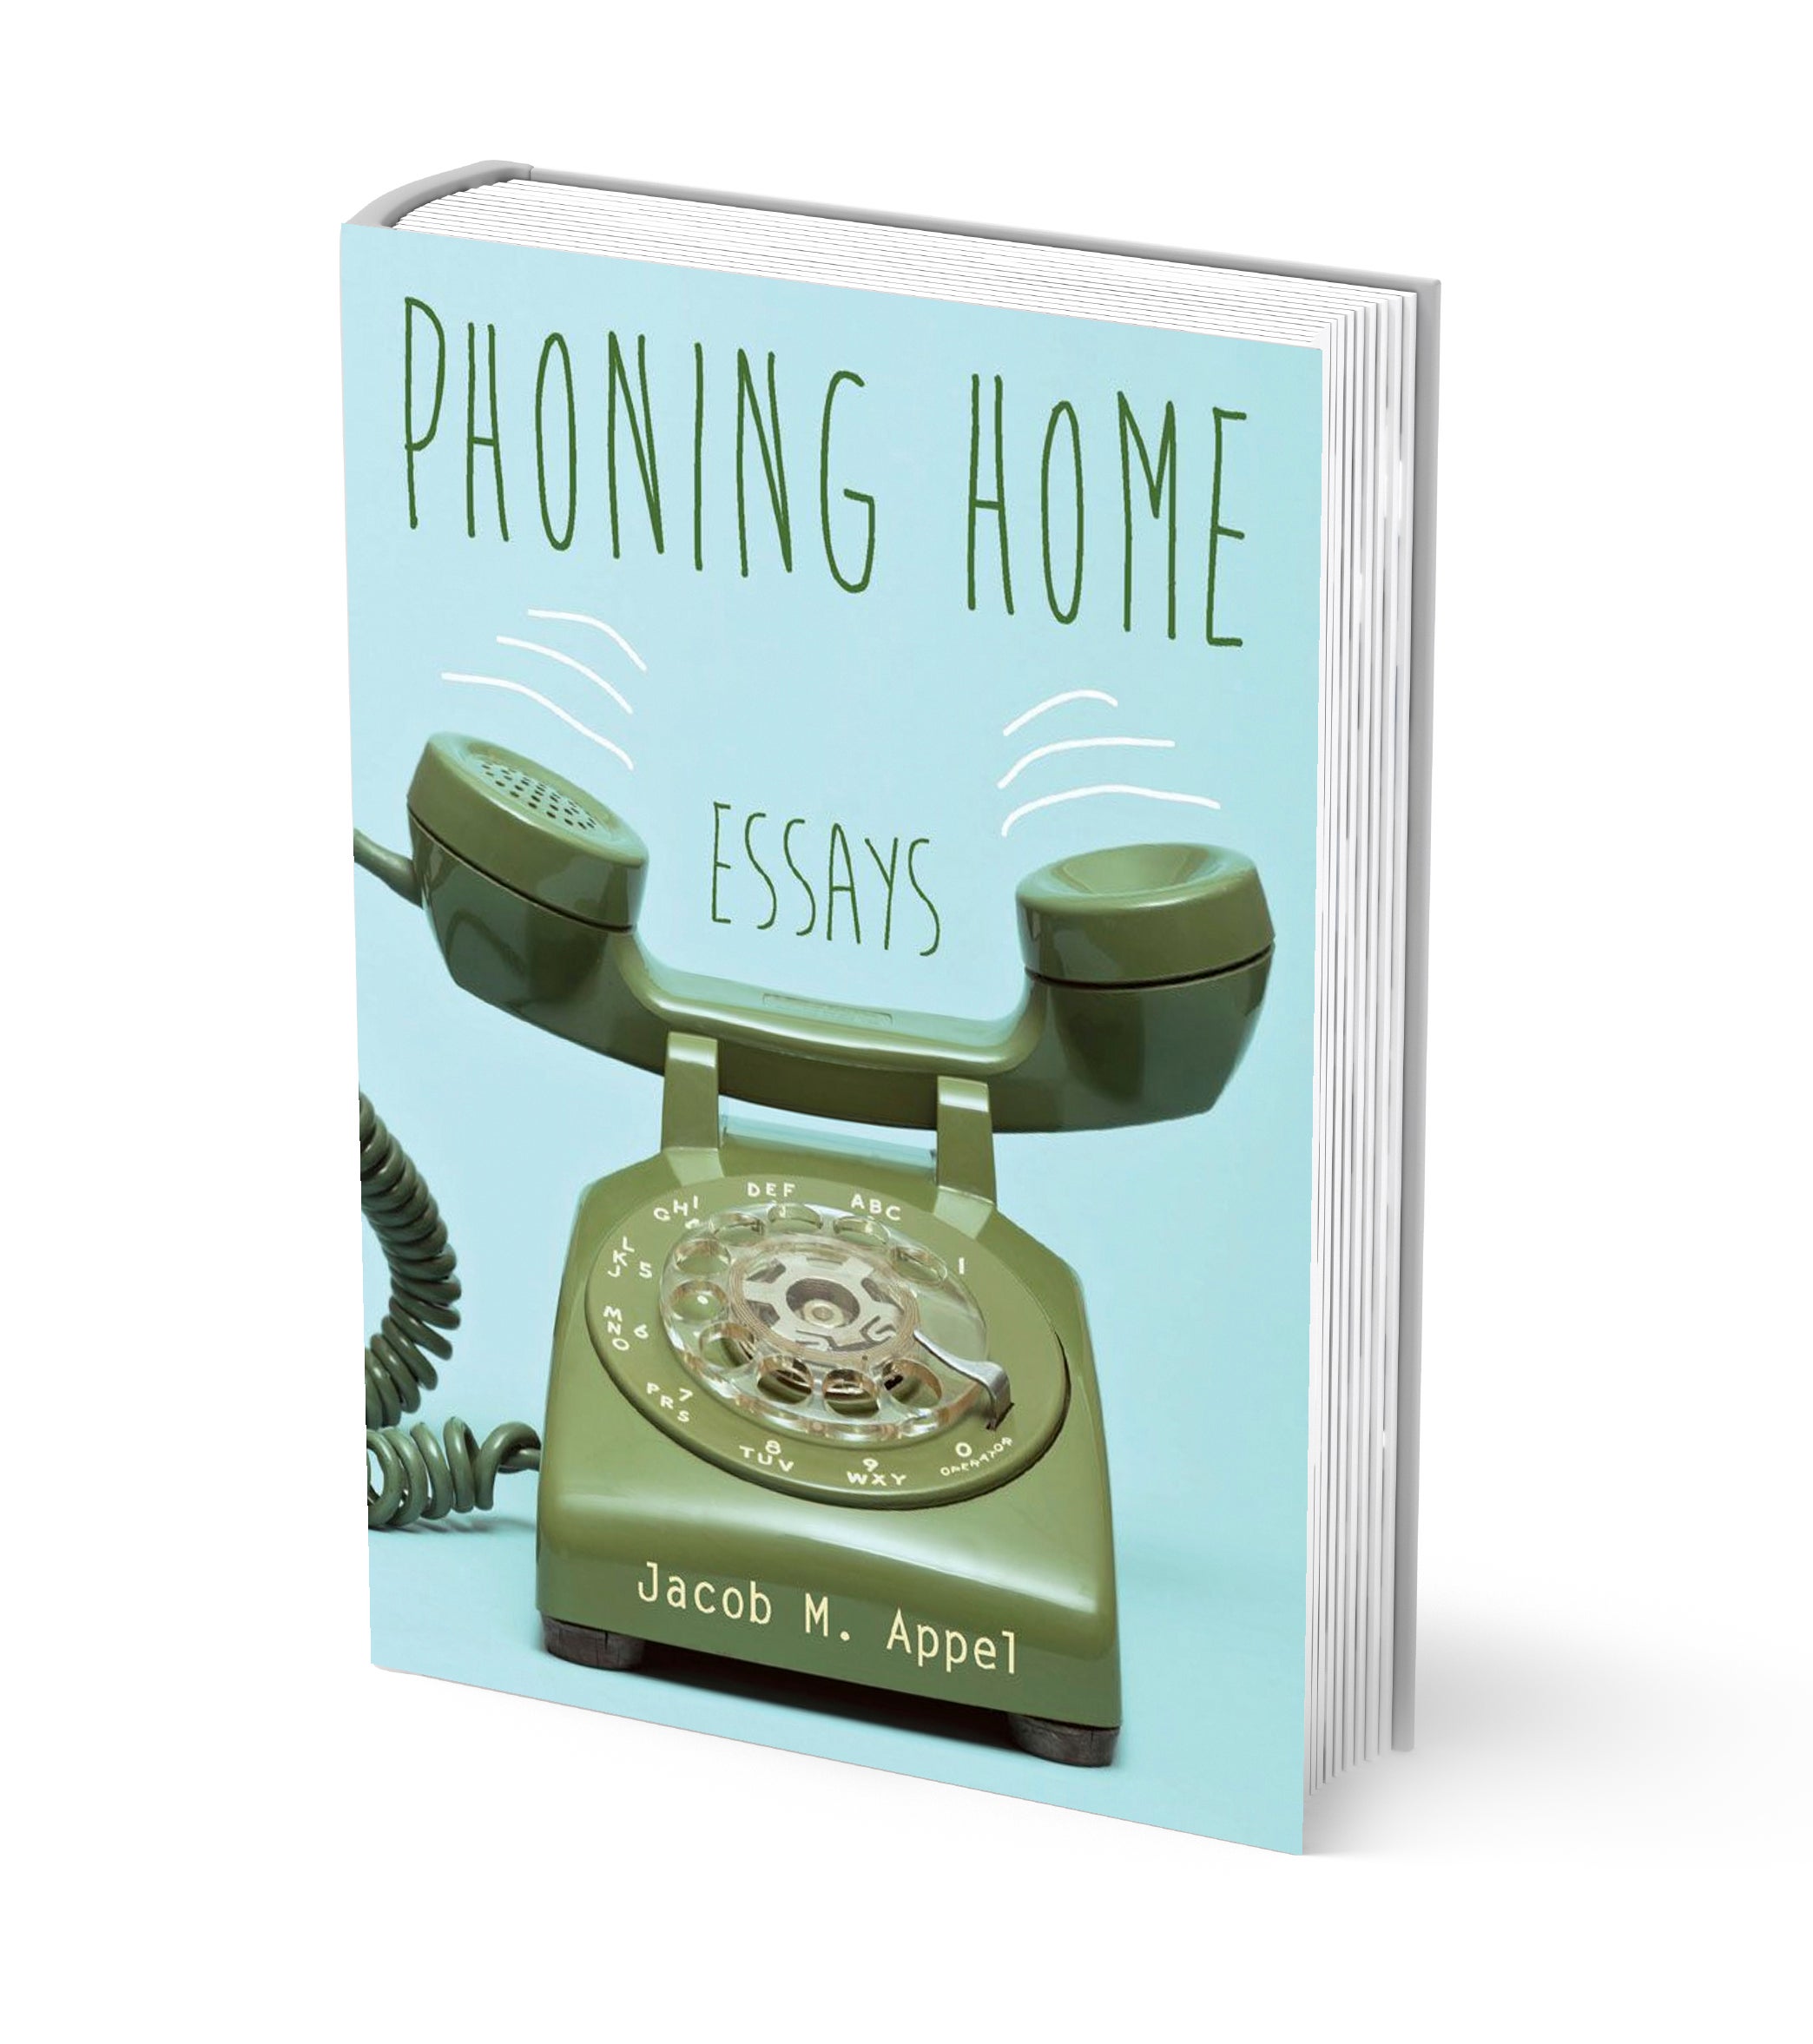 Phoning Home Essays, by Jacob M. Appel